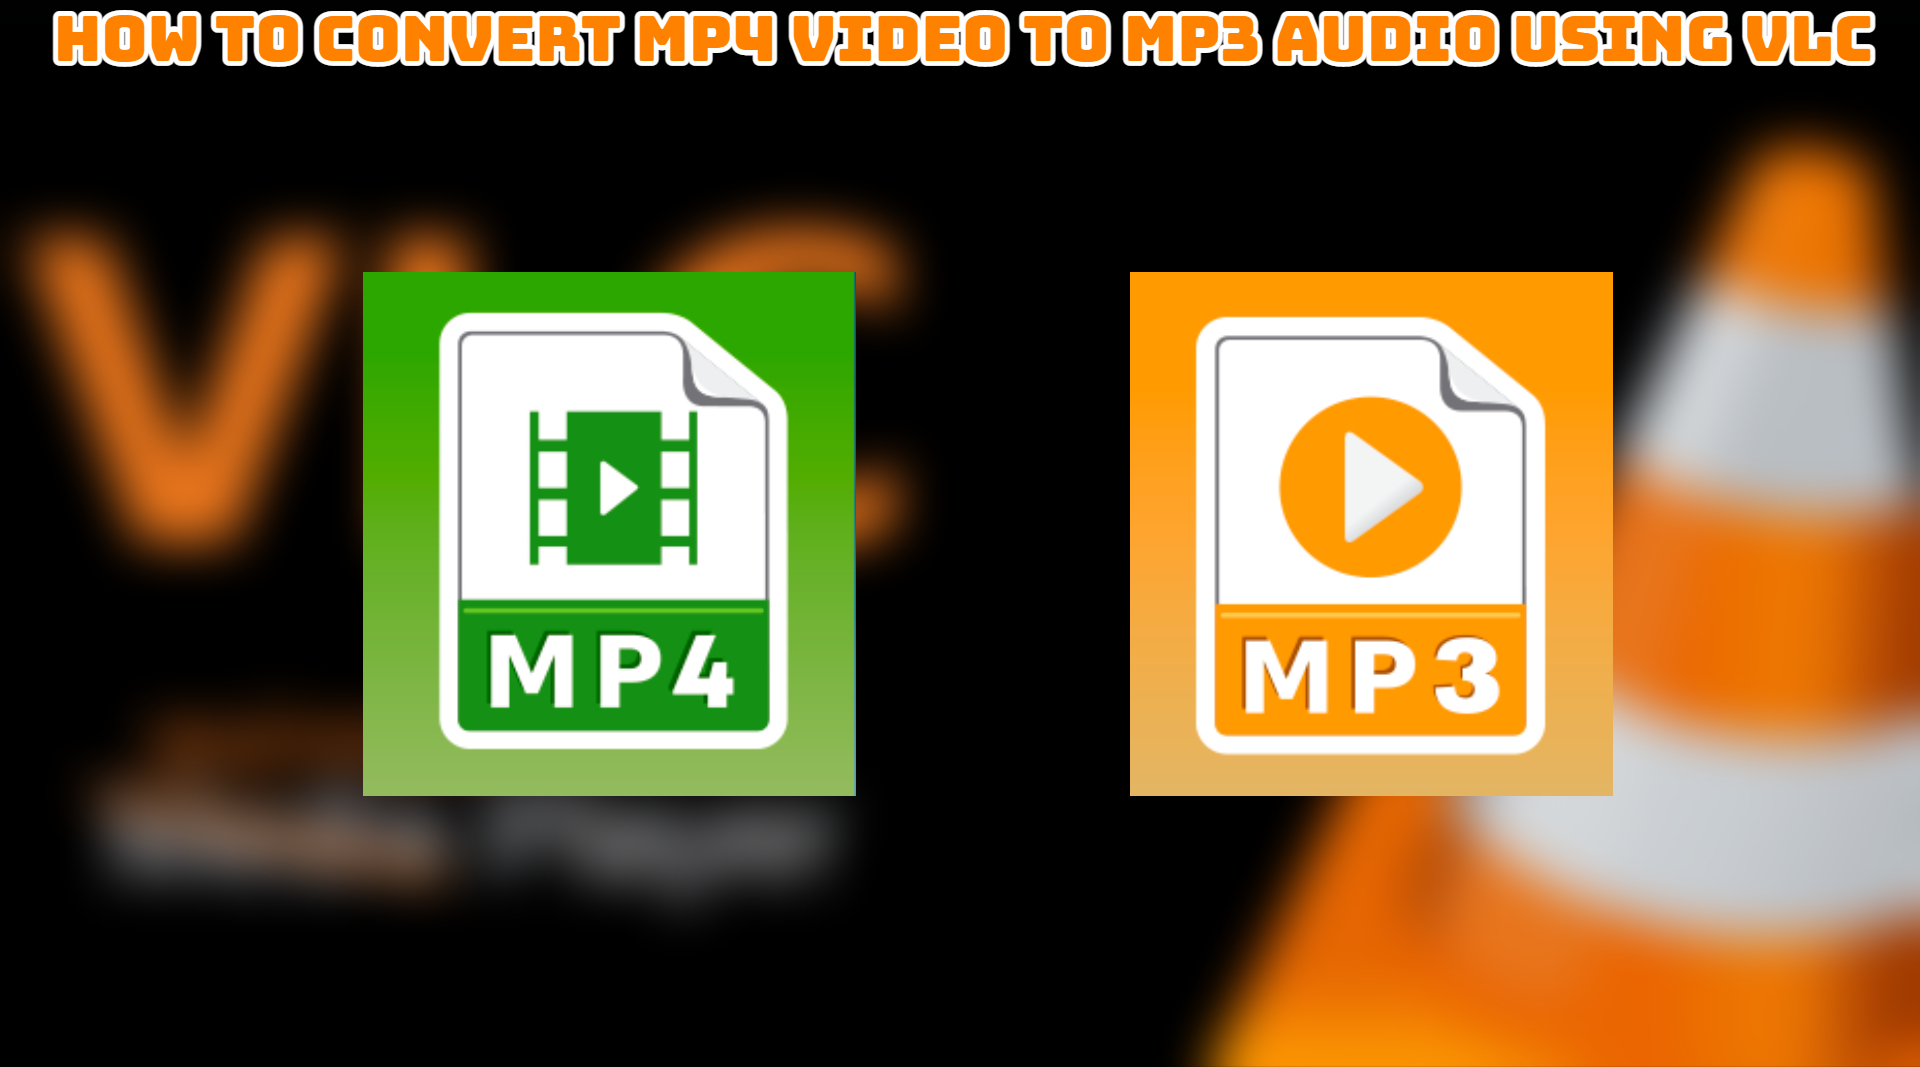 How To Convert MP4 Video To MP3 Audio Using VLC 1